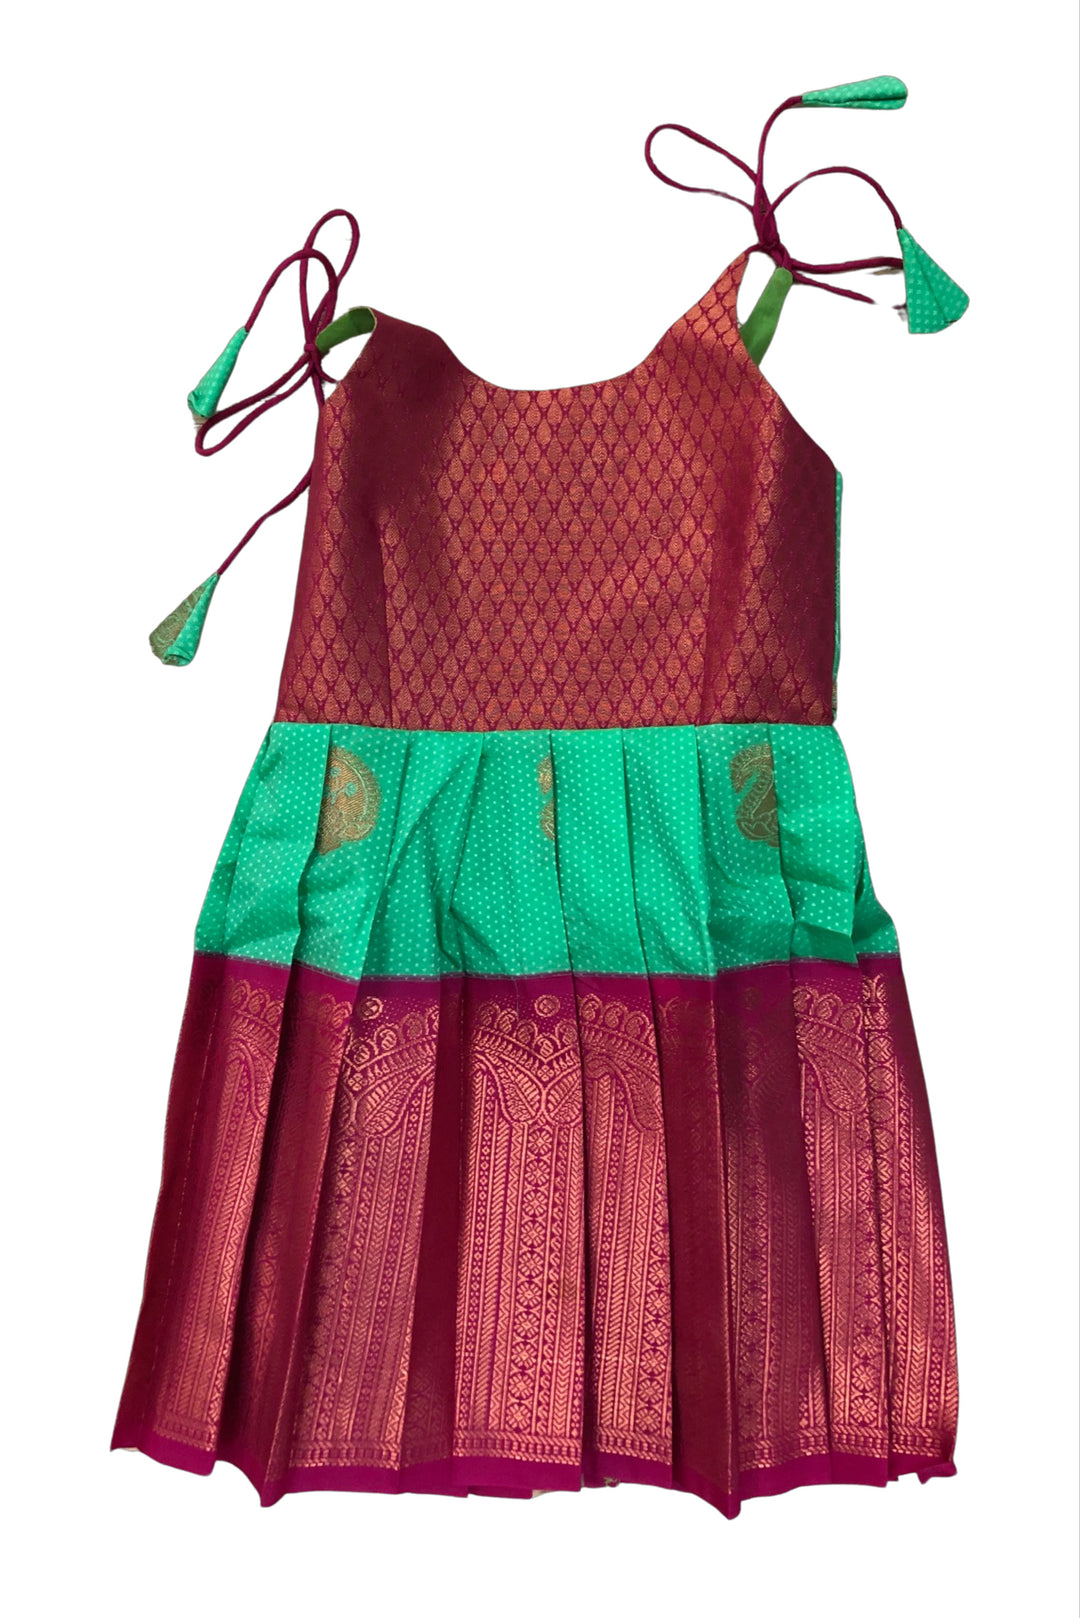 The Nesavu Tie-up Frock Elegant Purple and Green Silk Tie Up Frock with Golden Zari for Kids Nesavu 18 (2Y) / Green / Style 1 T302A-18 Traditional Purple & Green Silk Frock with Zari for Girls | The Nesavu